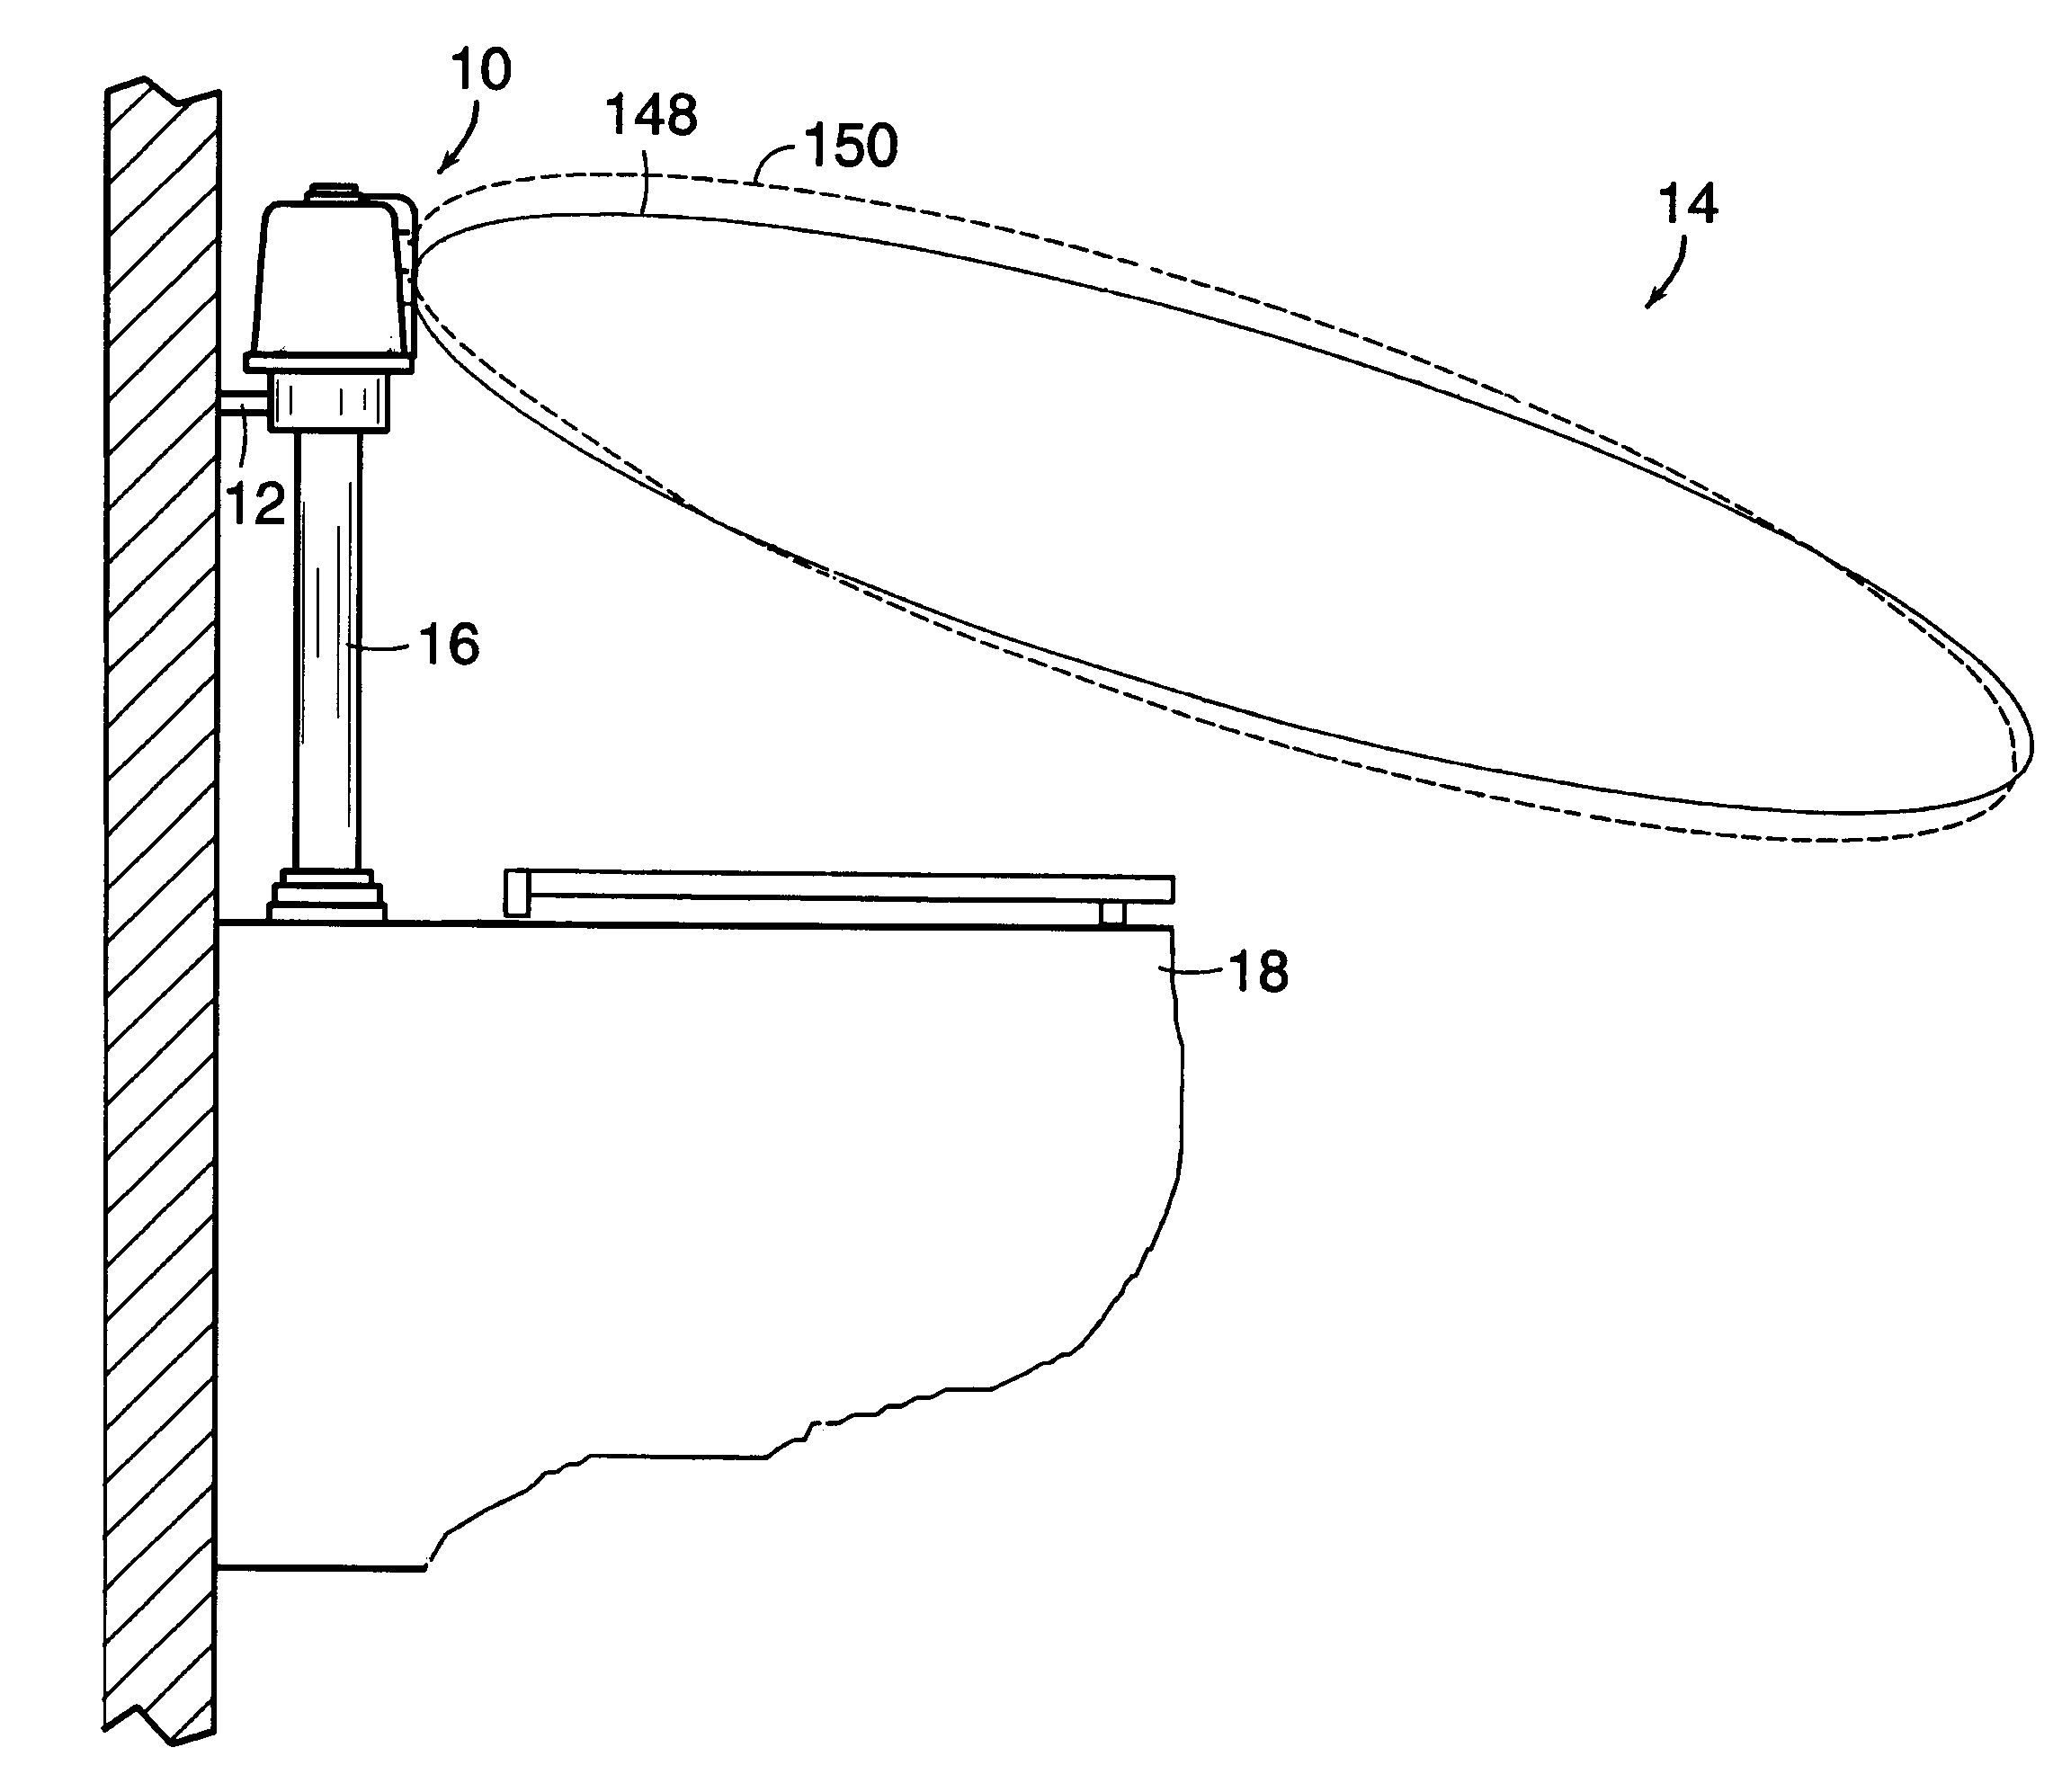 Adaptive object-sensing system for automatic flusher